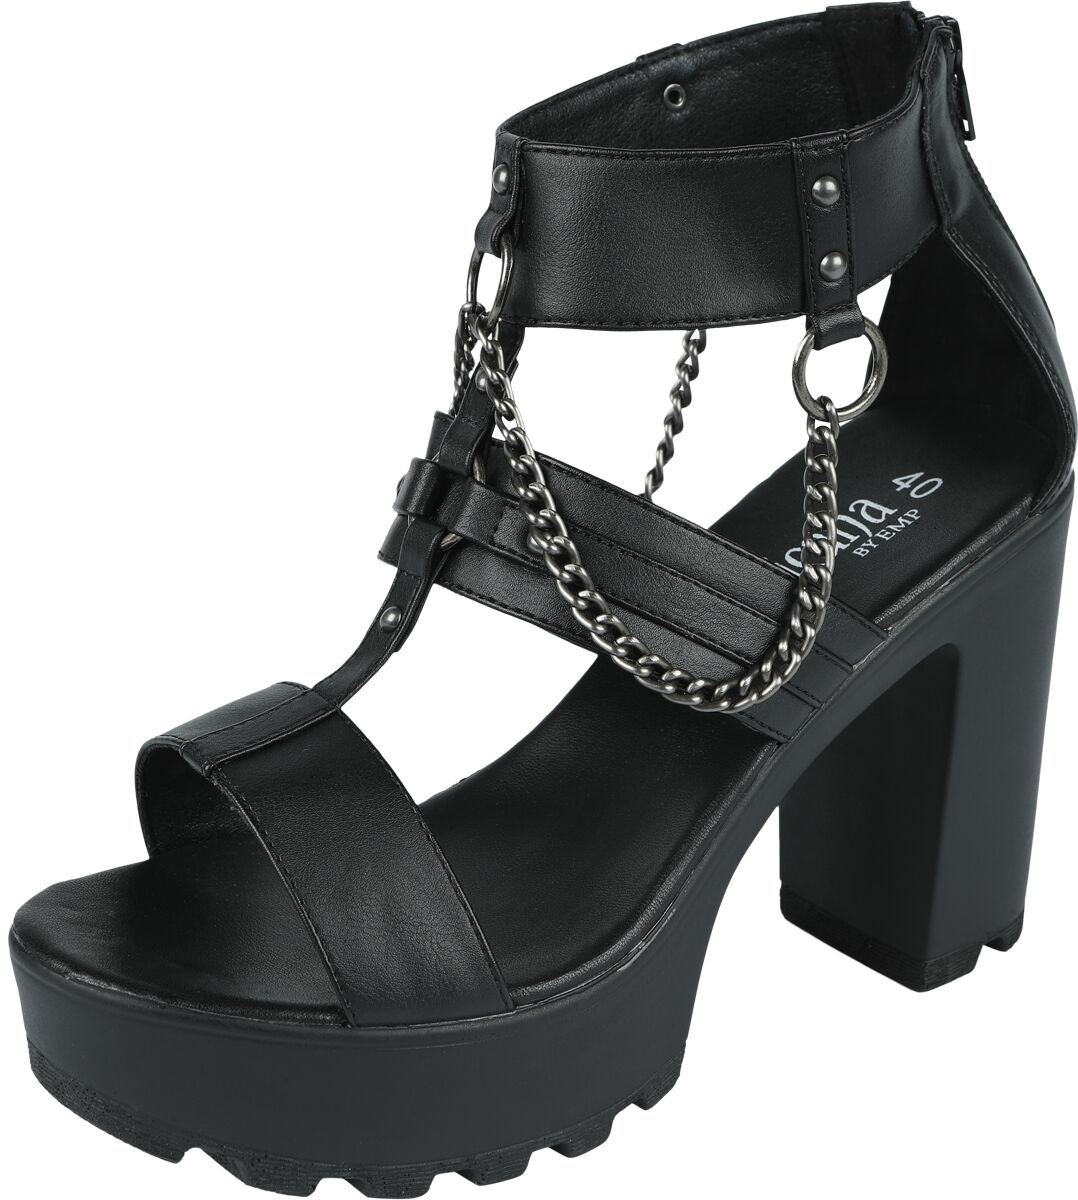 Image of Tacco alto Gothic di Gothicana by EMP - High Heels With Chains And Rivets - EU37 a EU41 - Donna - nero